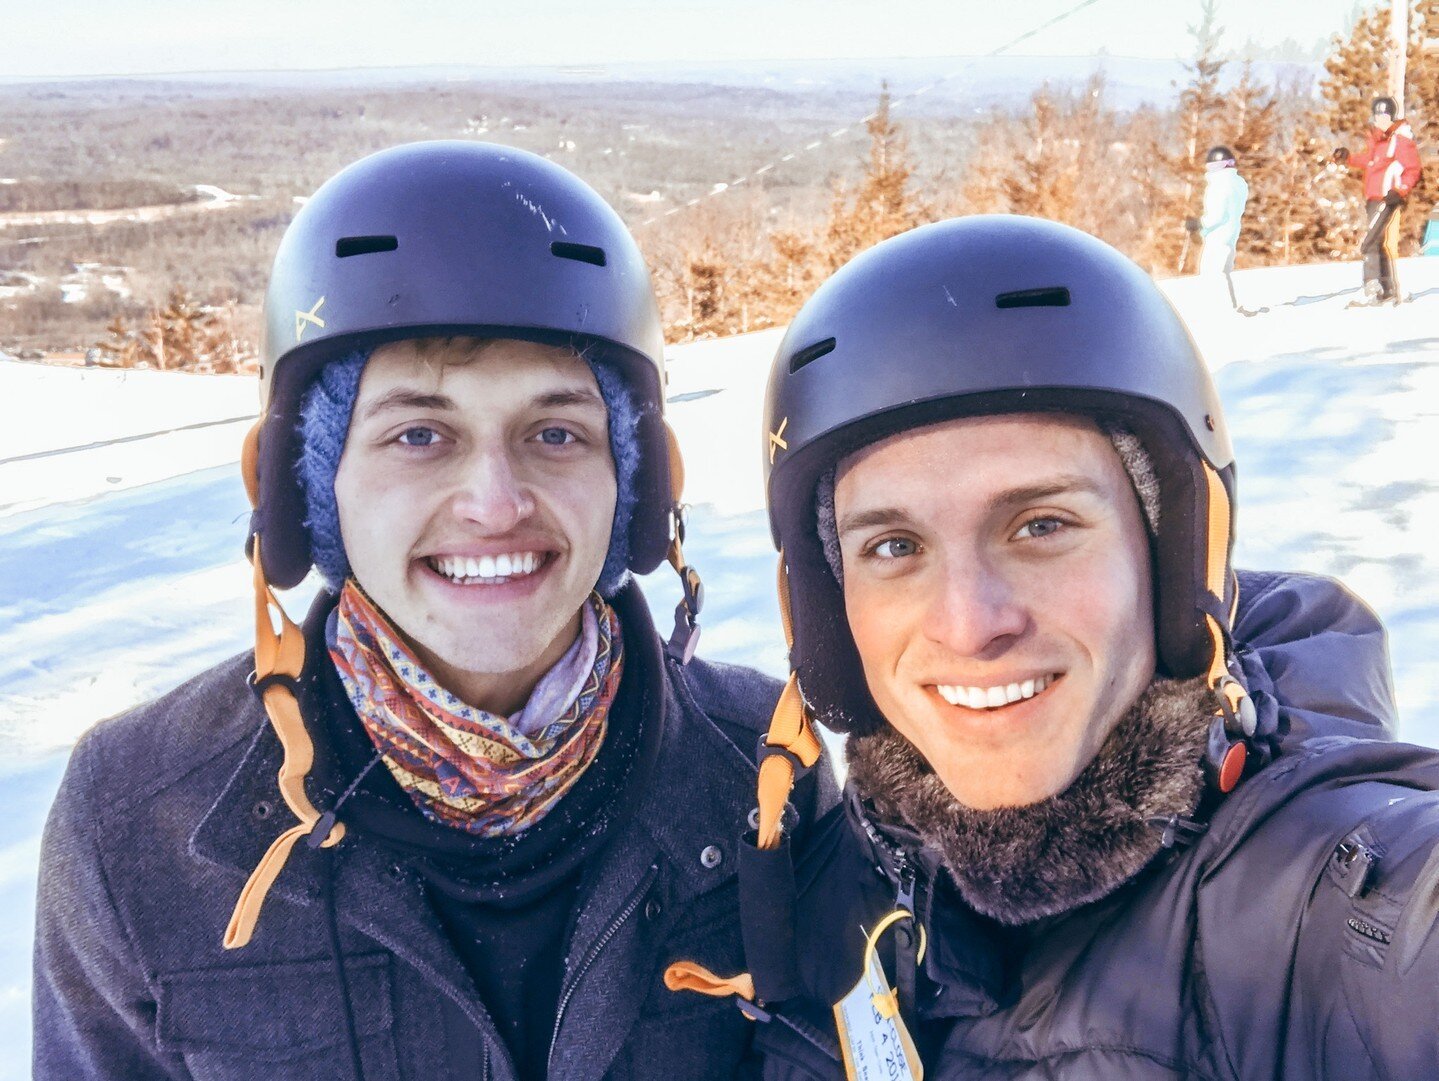 We definitely are not missing the snow pictured here, but thought this was a nice throwback from early in our relationship. 💙⛷
.
Brad and I had been dating for about 3 weeks when he surprised me with a ski vacation in the Poconos. It was the sweetes